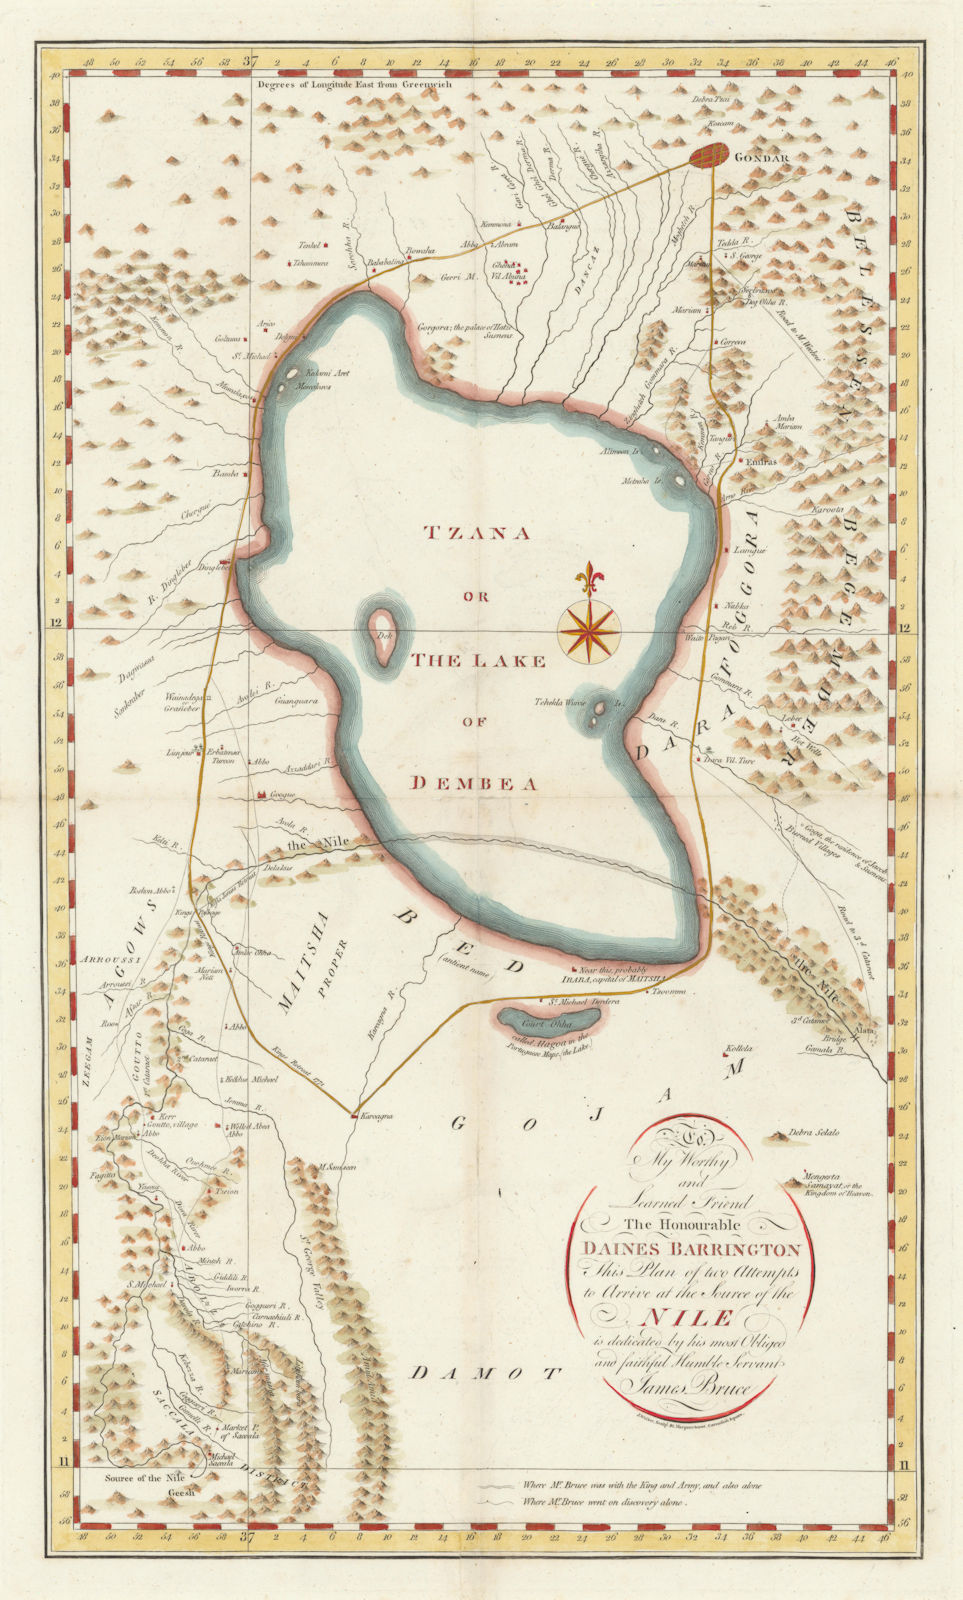 Plan of two attempts to arrive at the source of the Nile by James Bruce 1804 map